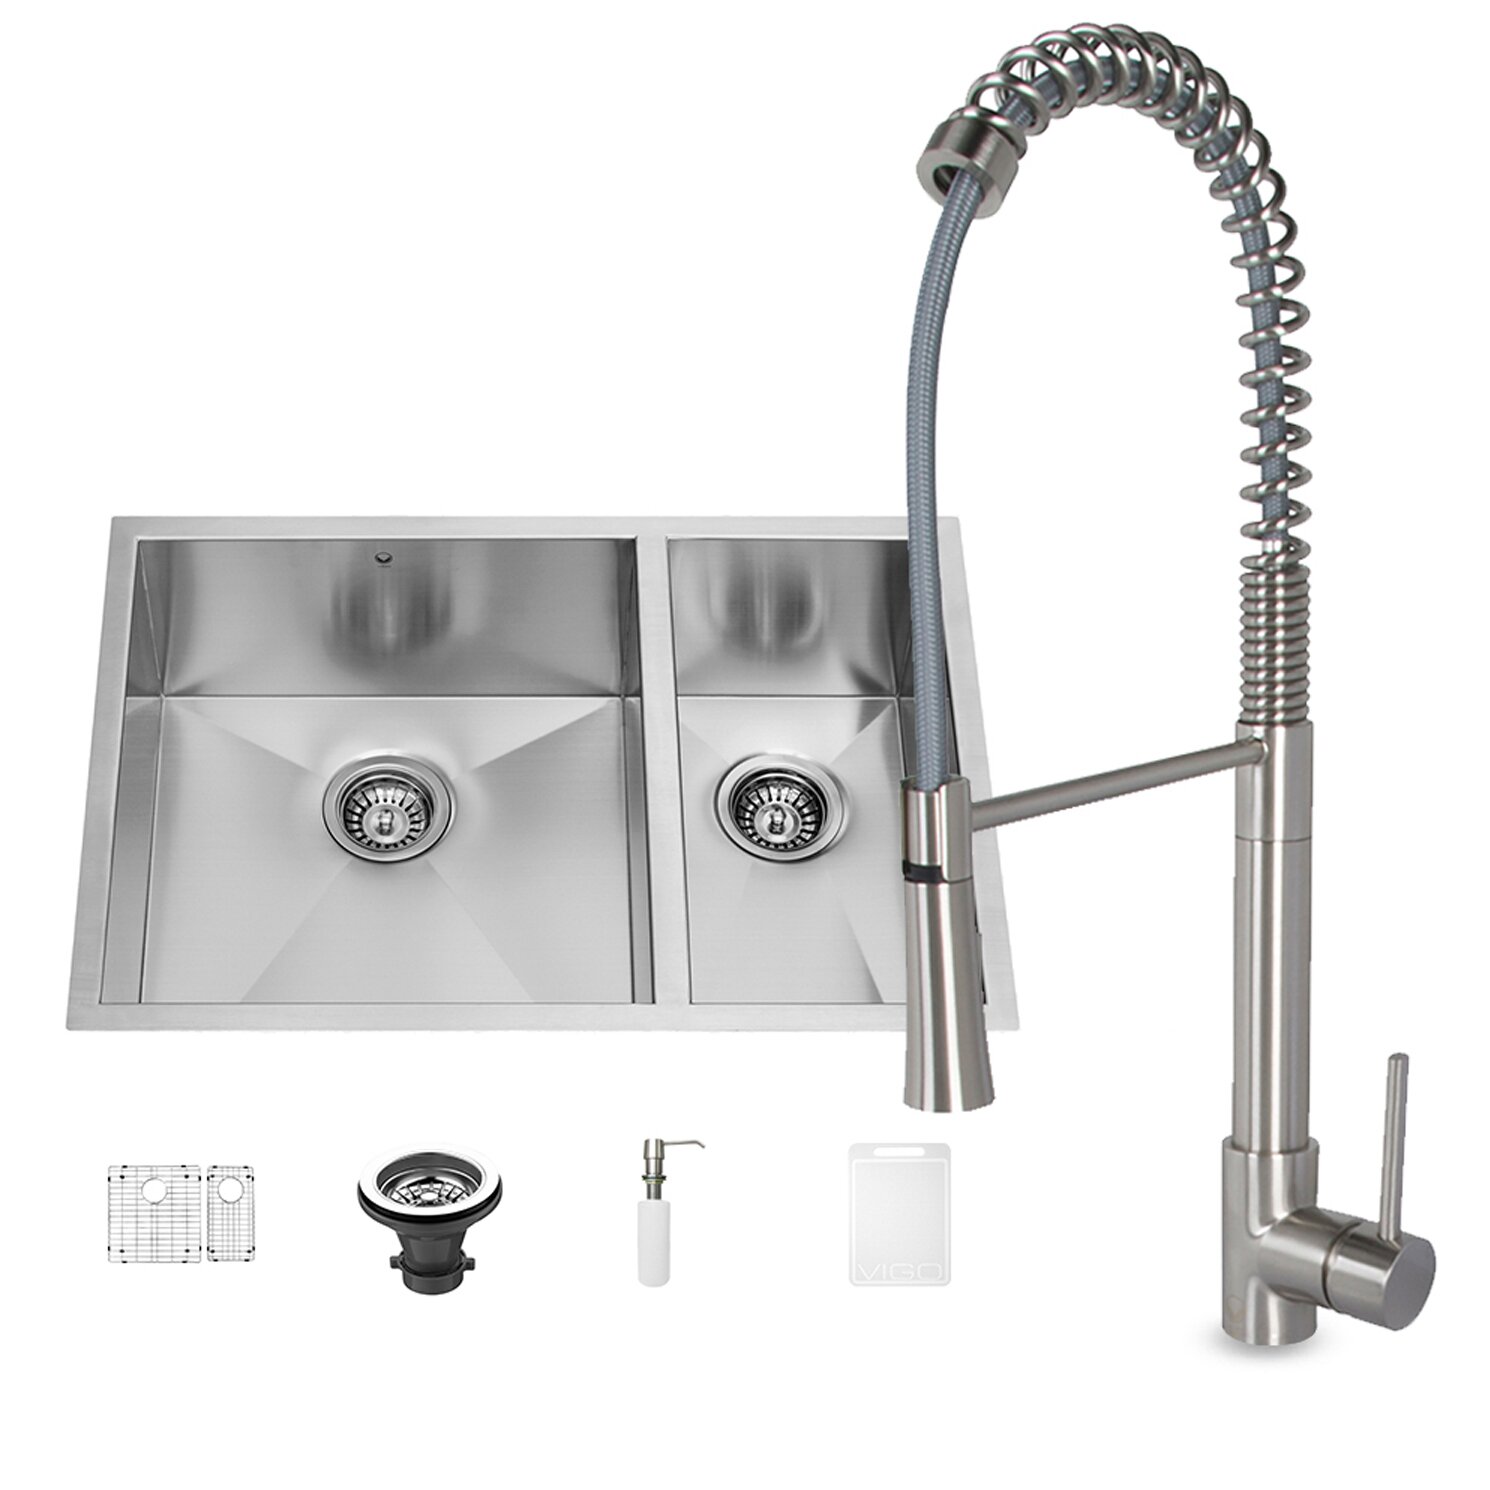 Vigo 29 x 20 Undermount 70 30 Double Bowl 16 Gauge Stainless Steel Kitchen Sink with Faucet VG15422